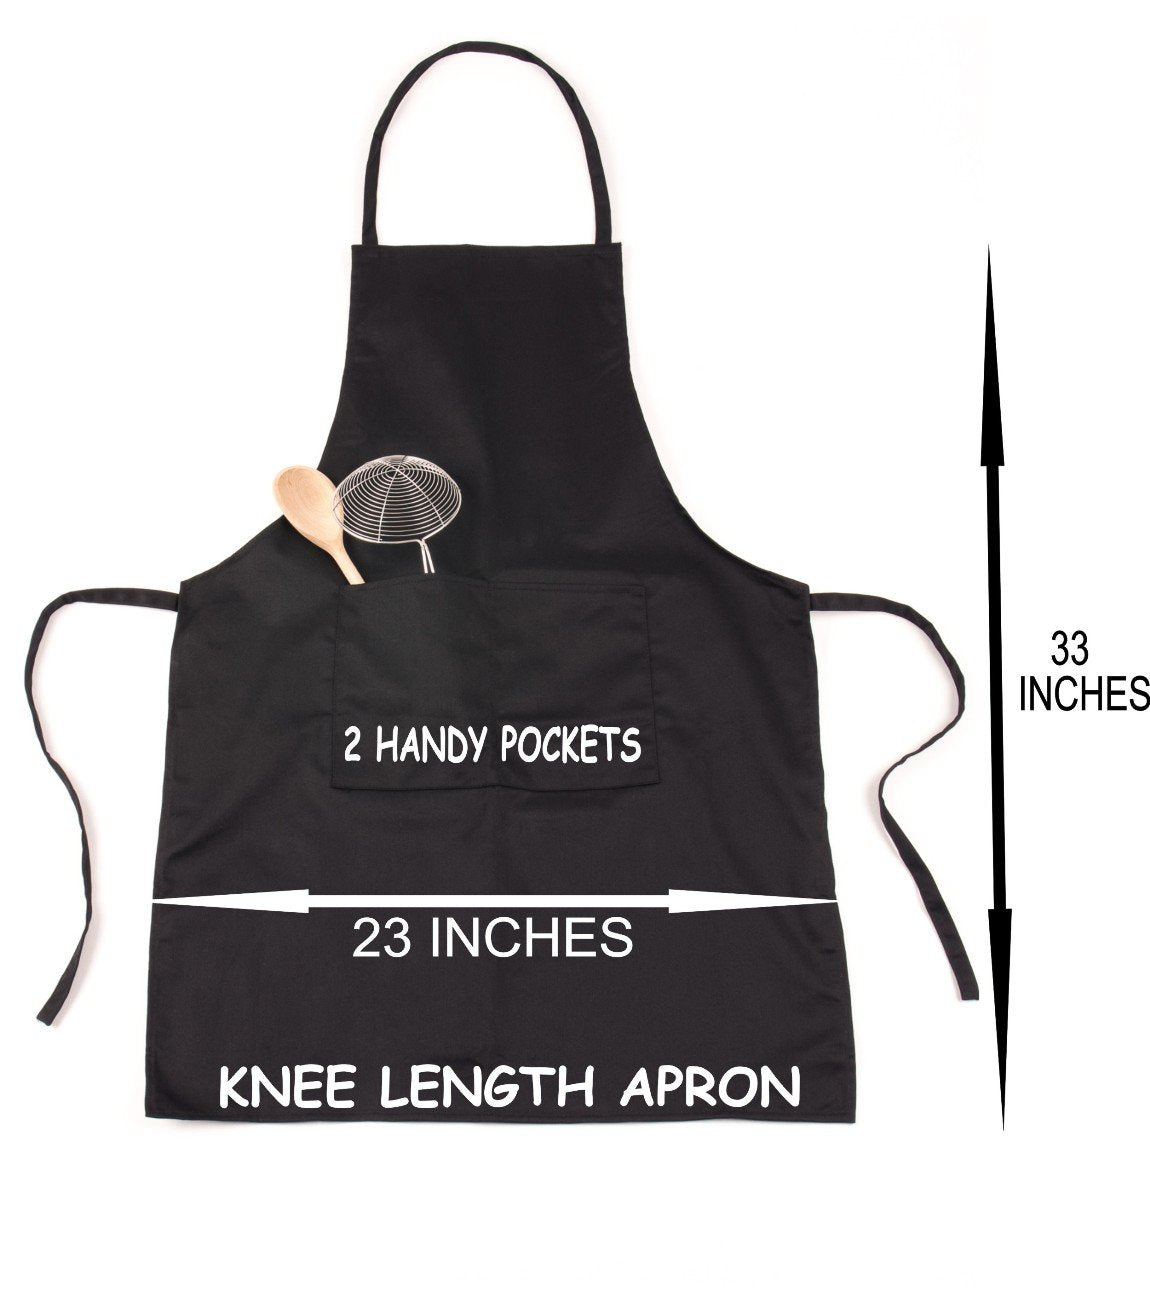 Golf Dad Golfer Apron Funny Birthday Gift Father's Day Cooking Baking BBQ